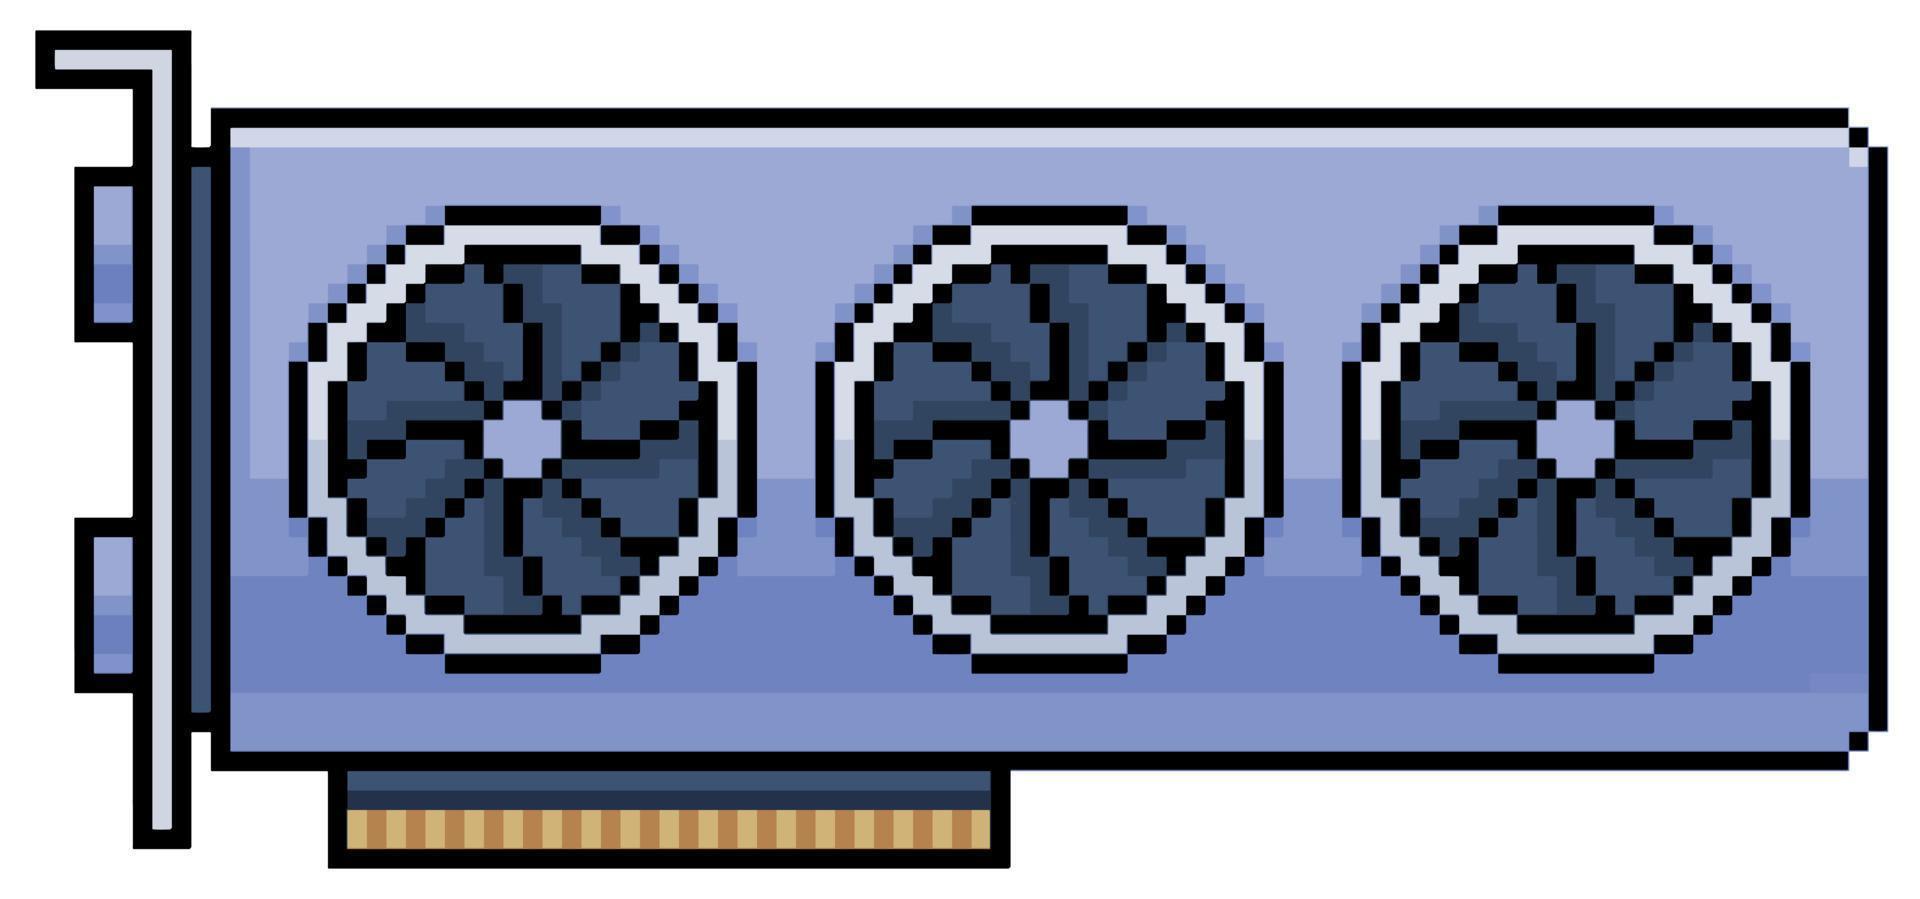 Pixel art graphics card with three fans vector icon for 8bit game on white background